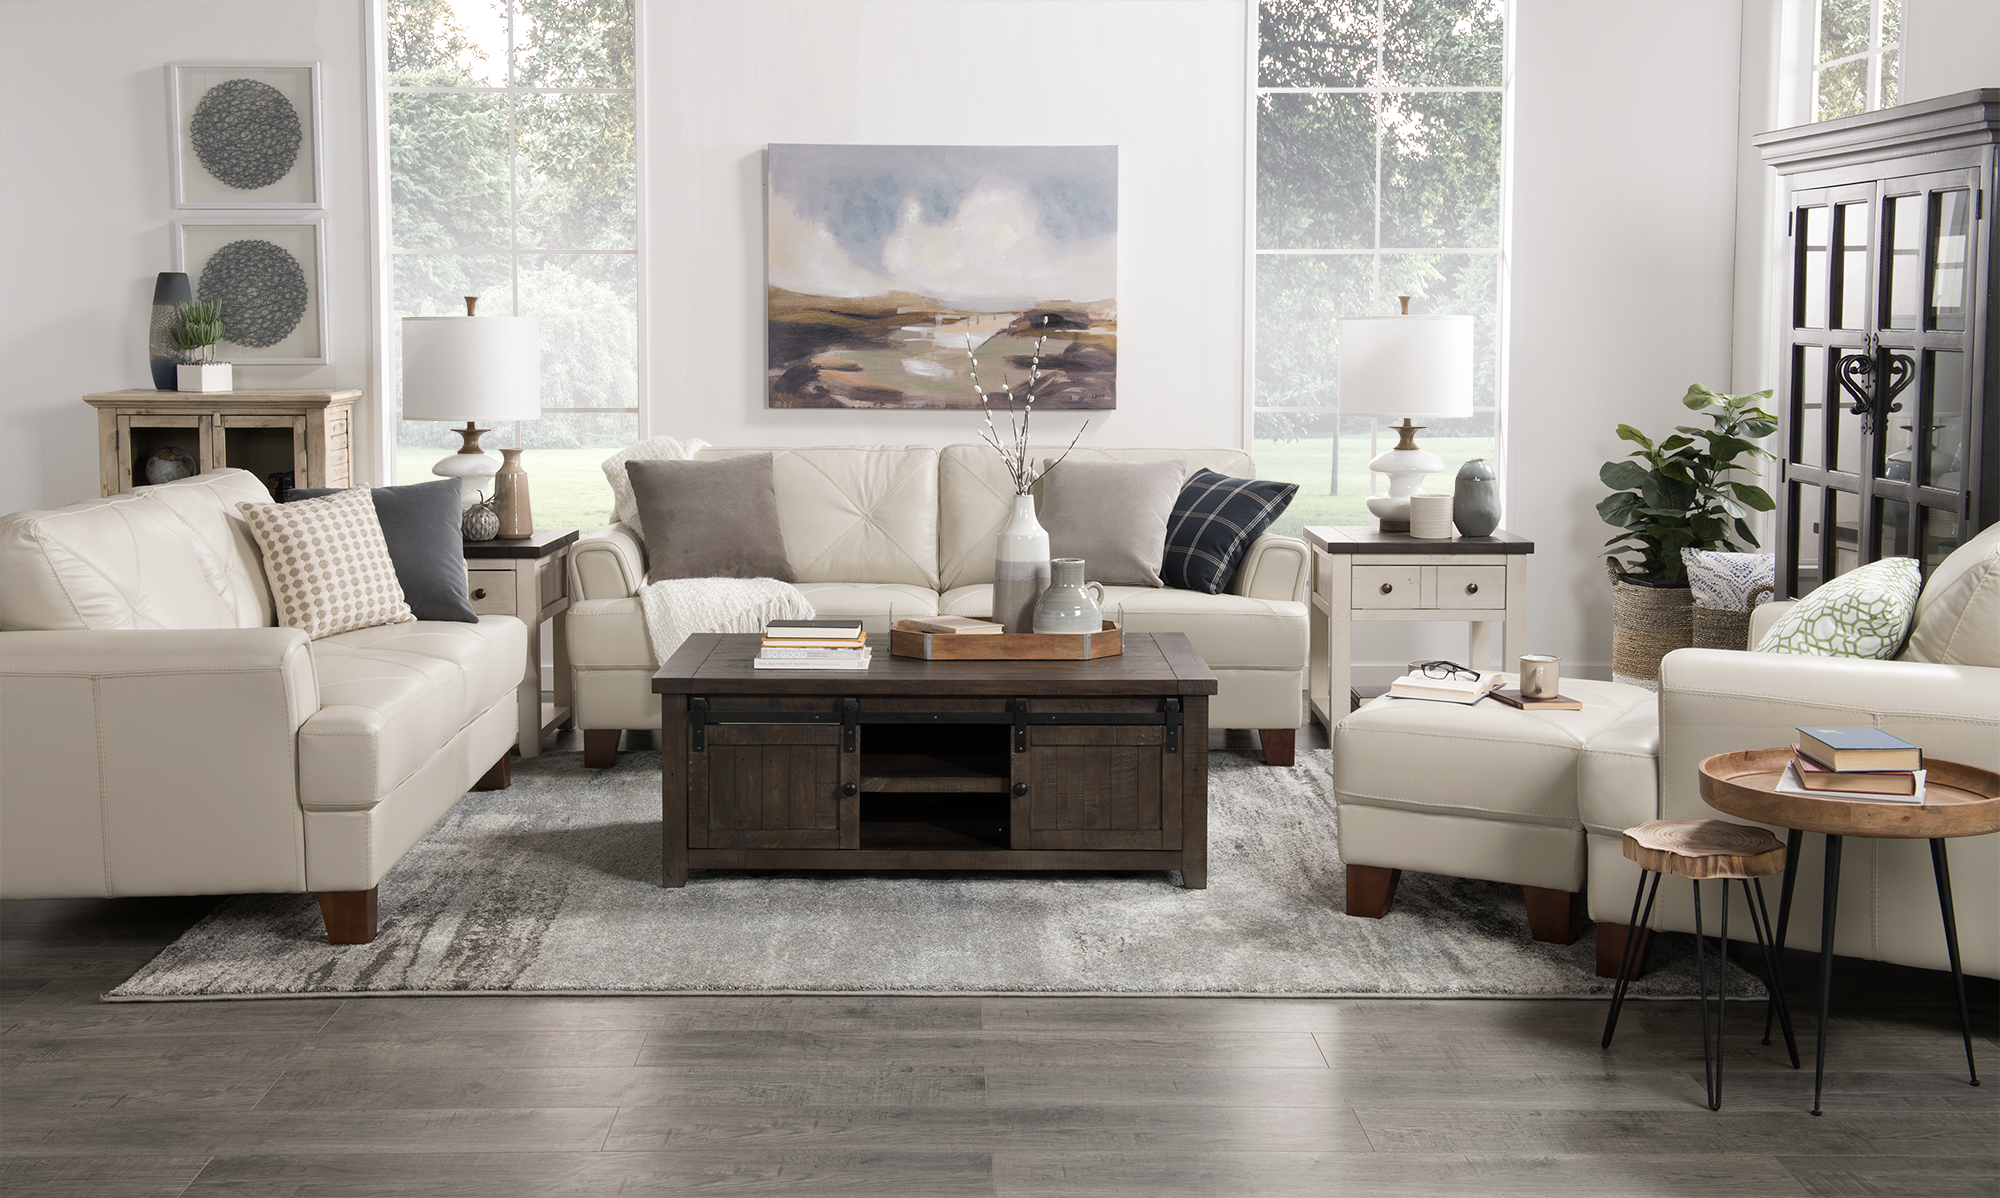 Chateaux d’Ax furniture collection in living room